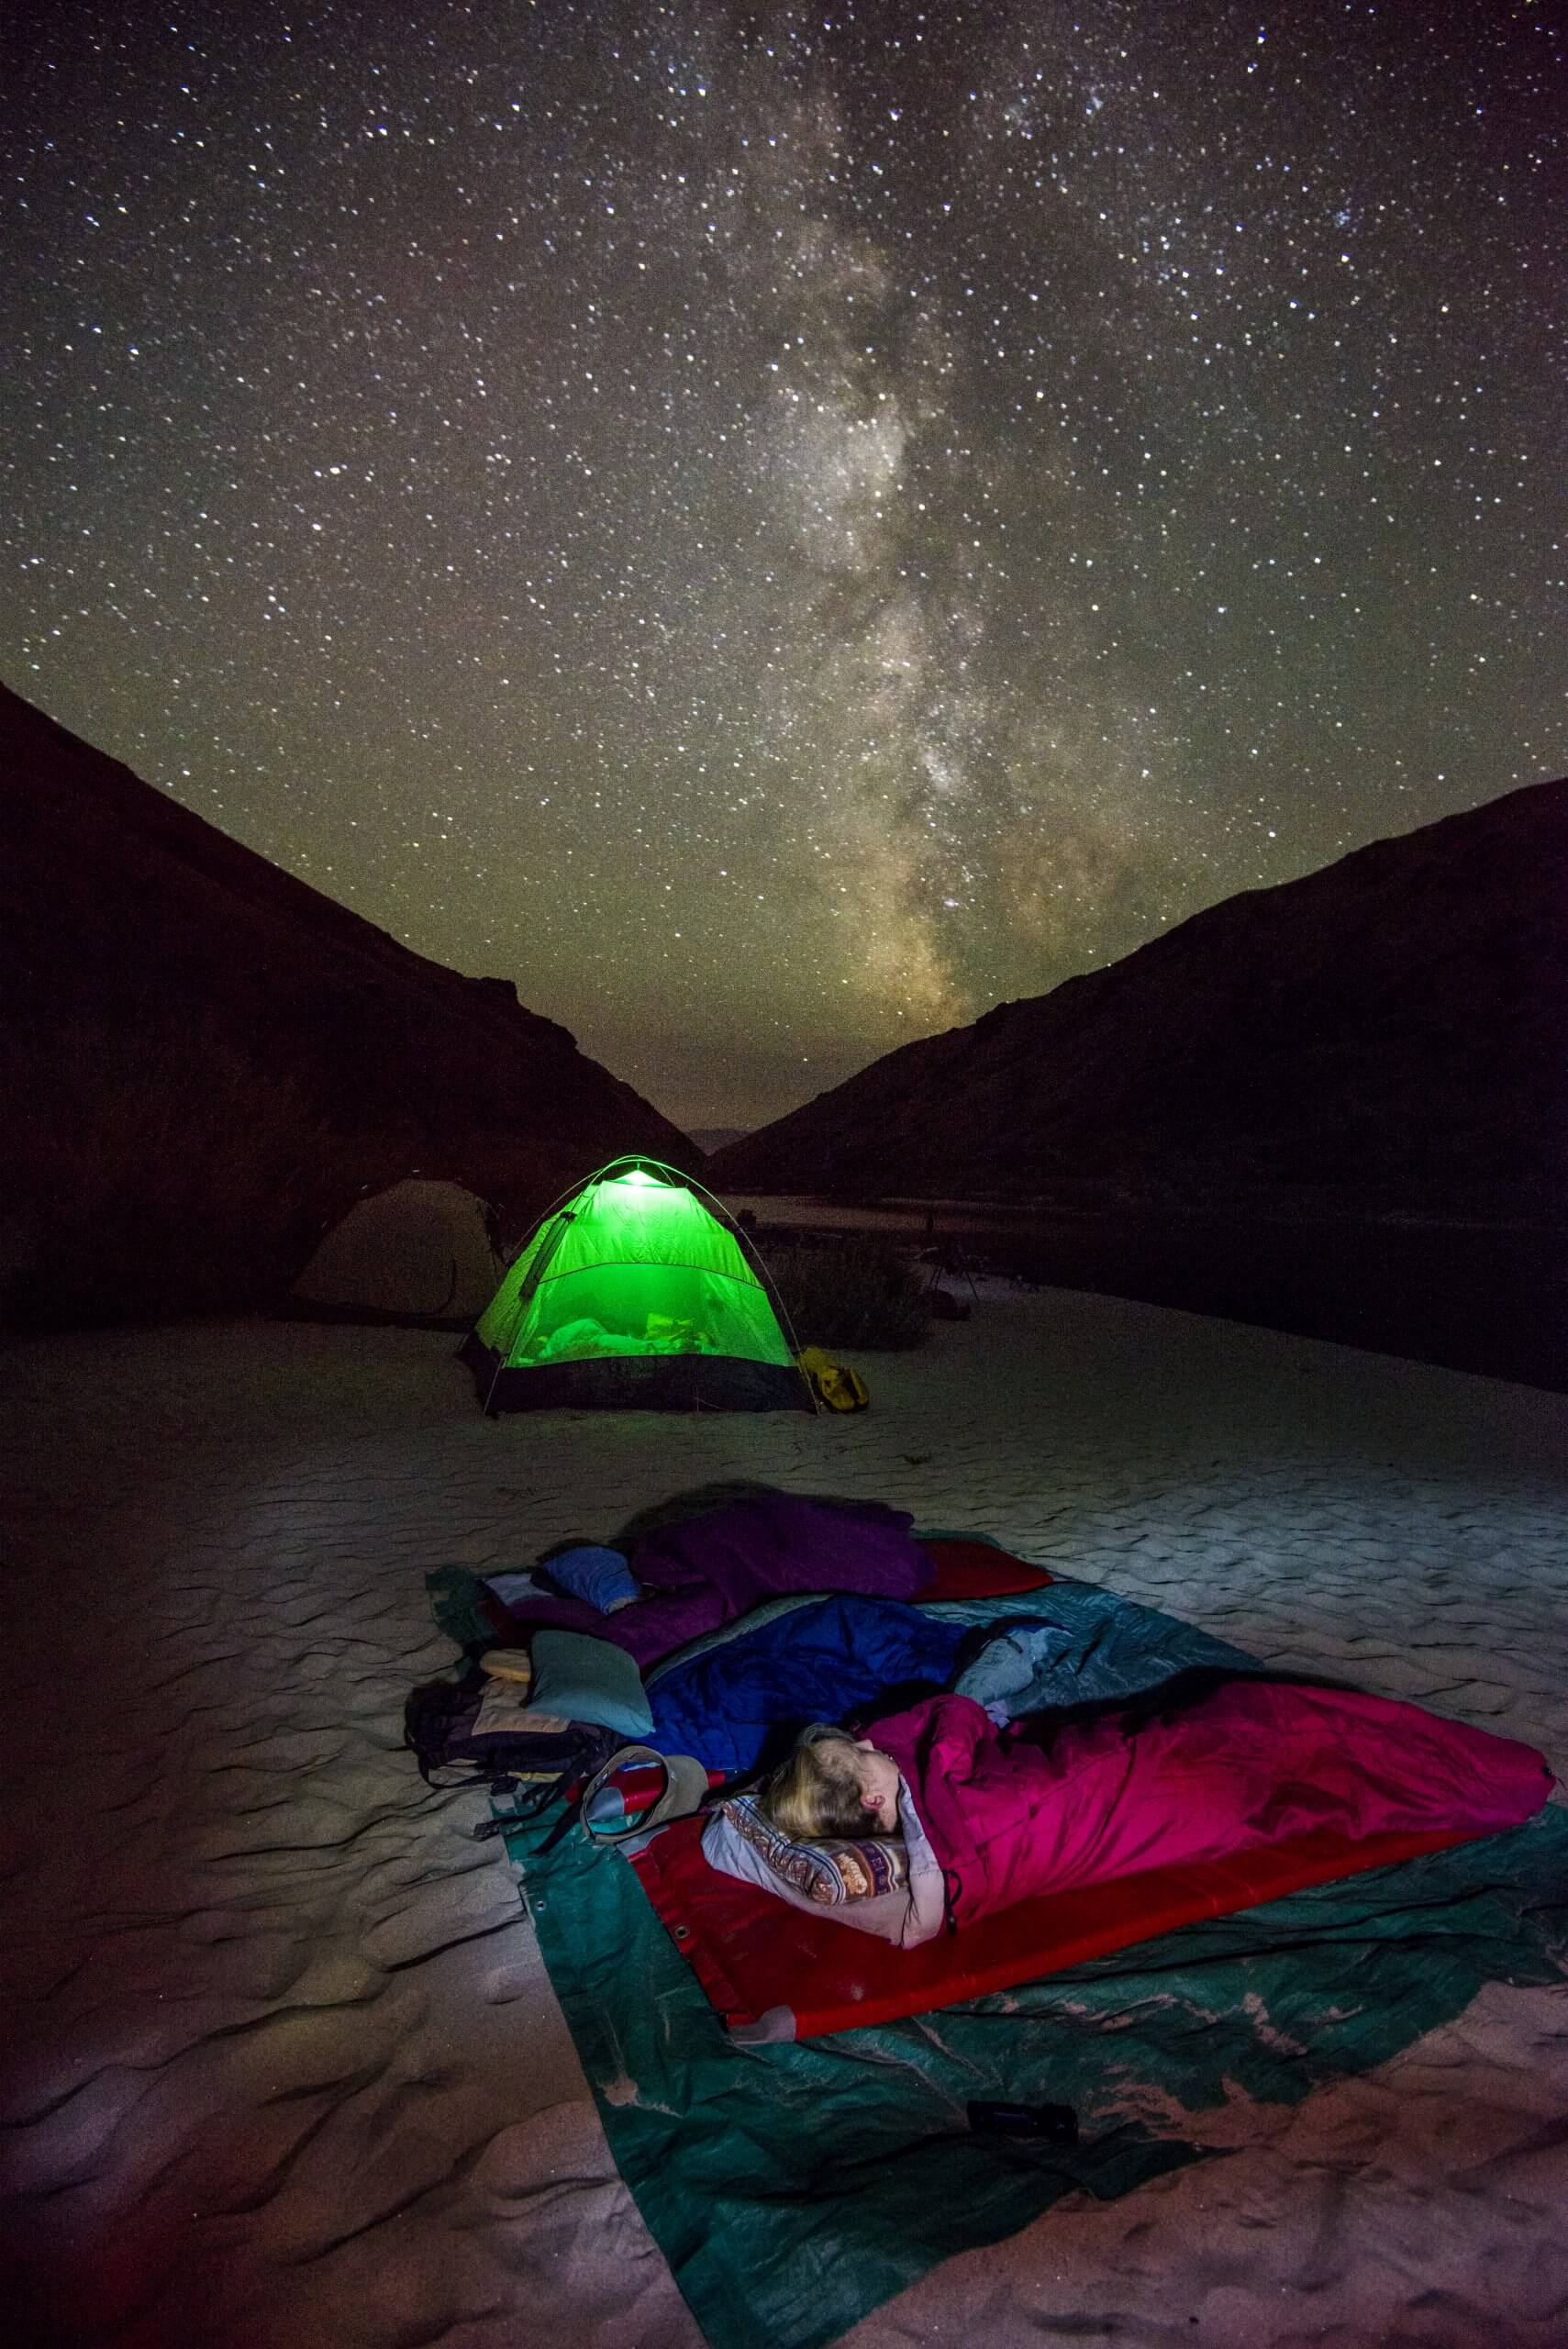 people sleep under the stars in sleeping bags with an illuminated green tent in the background